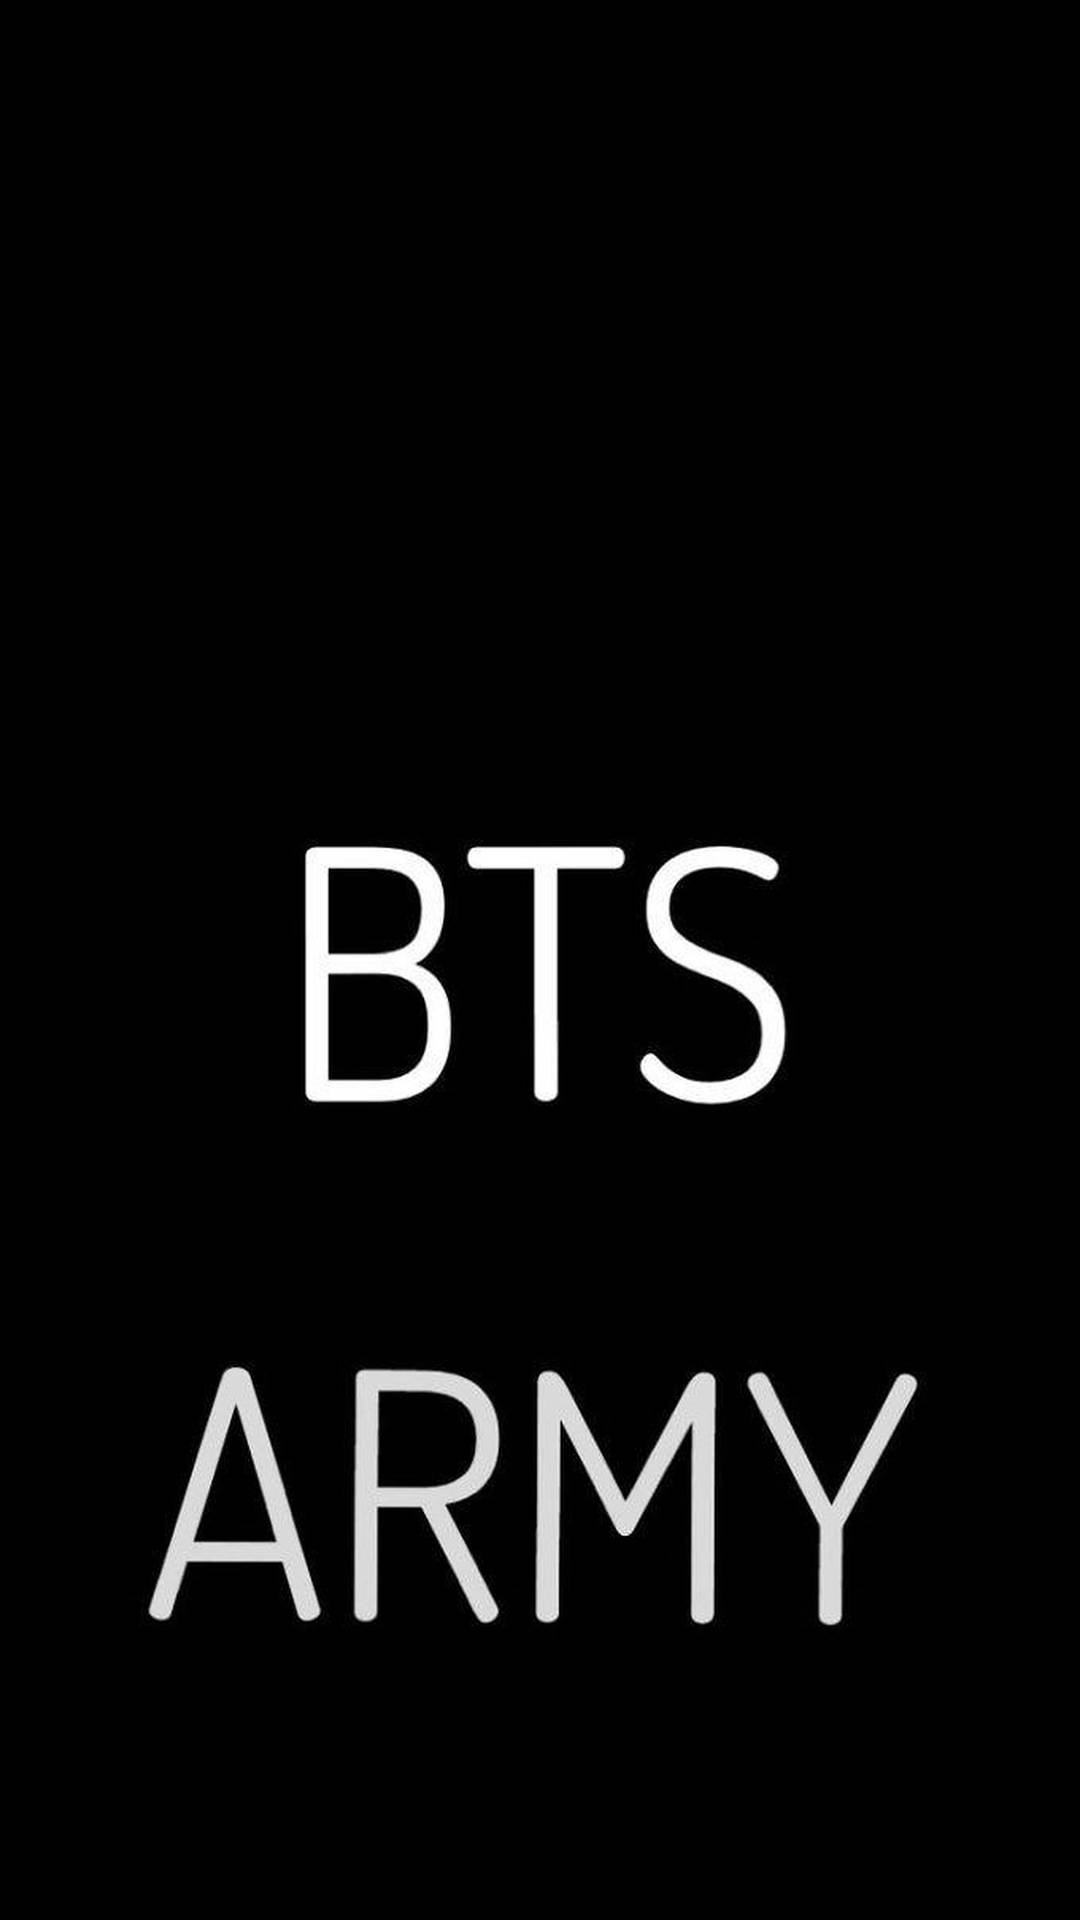 Bts Army Black Poster Background